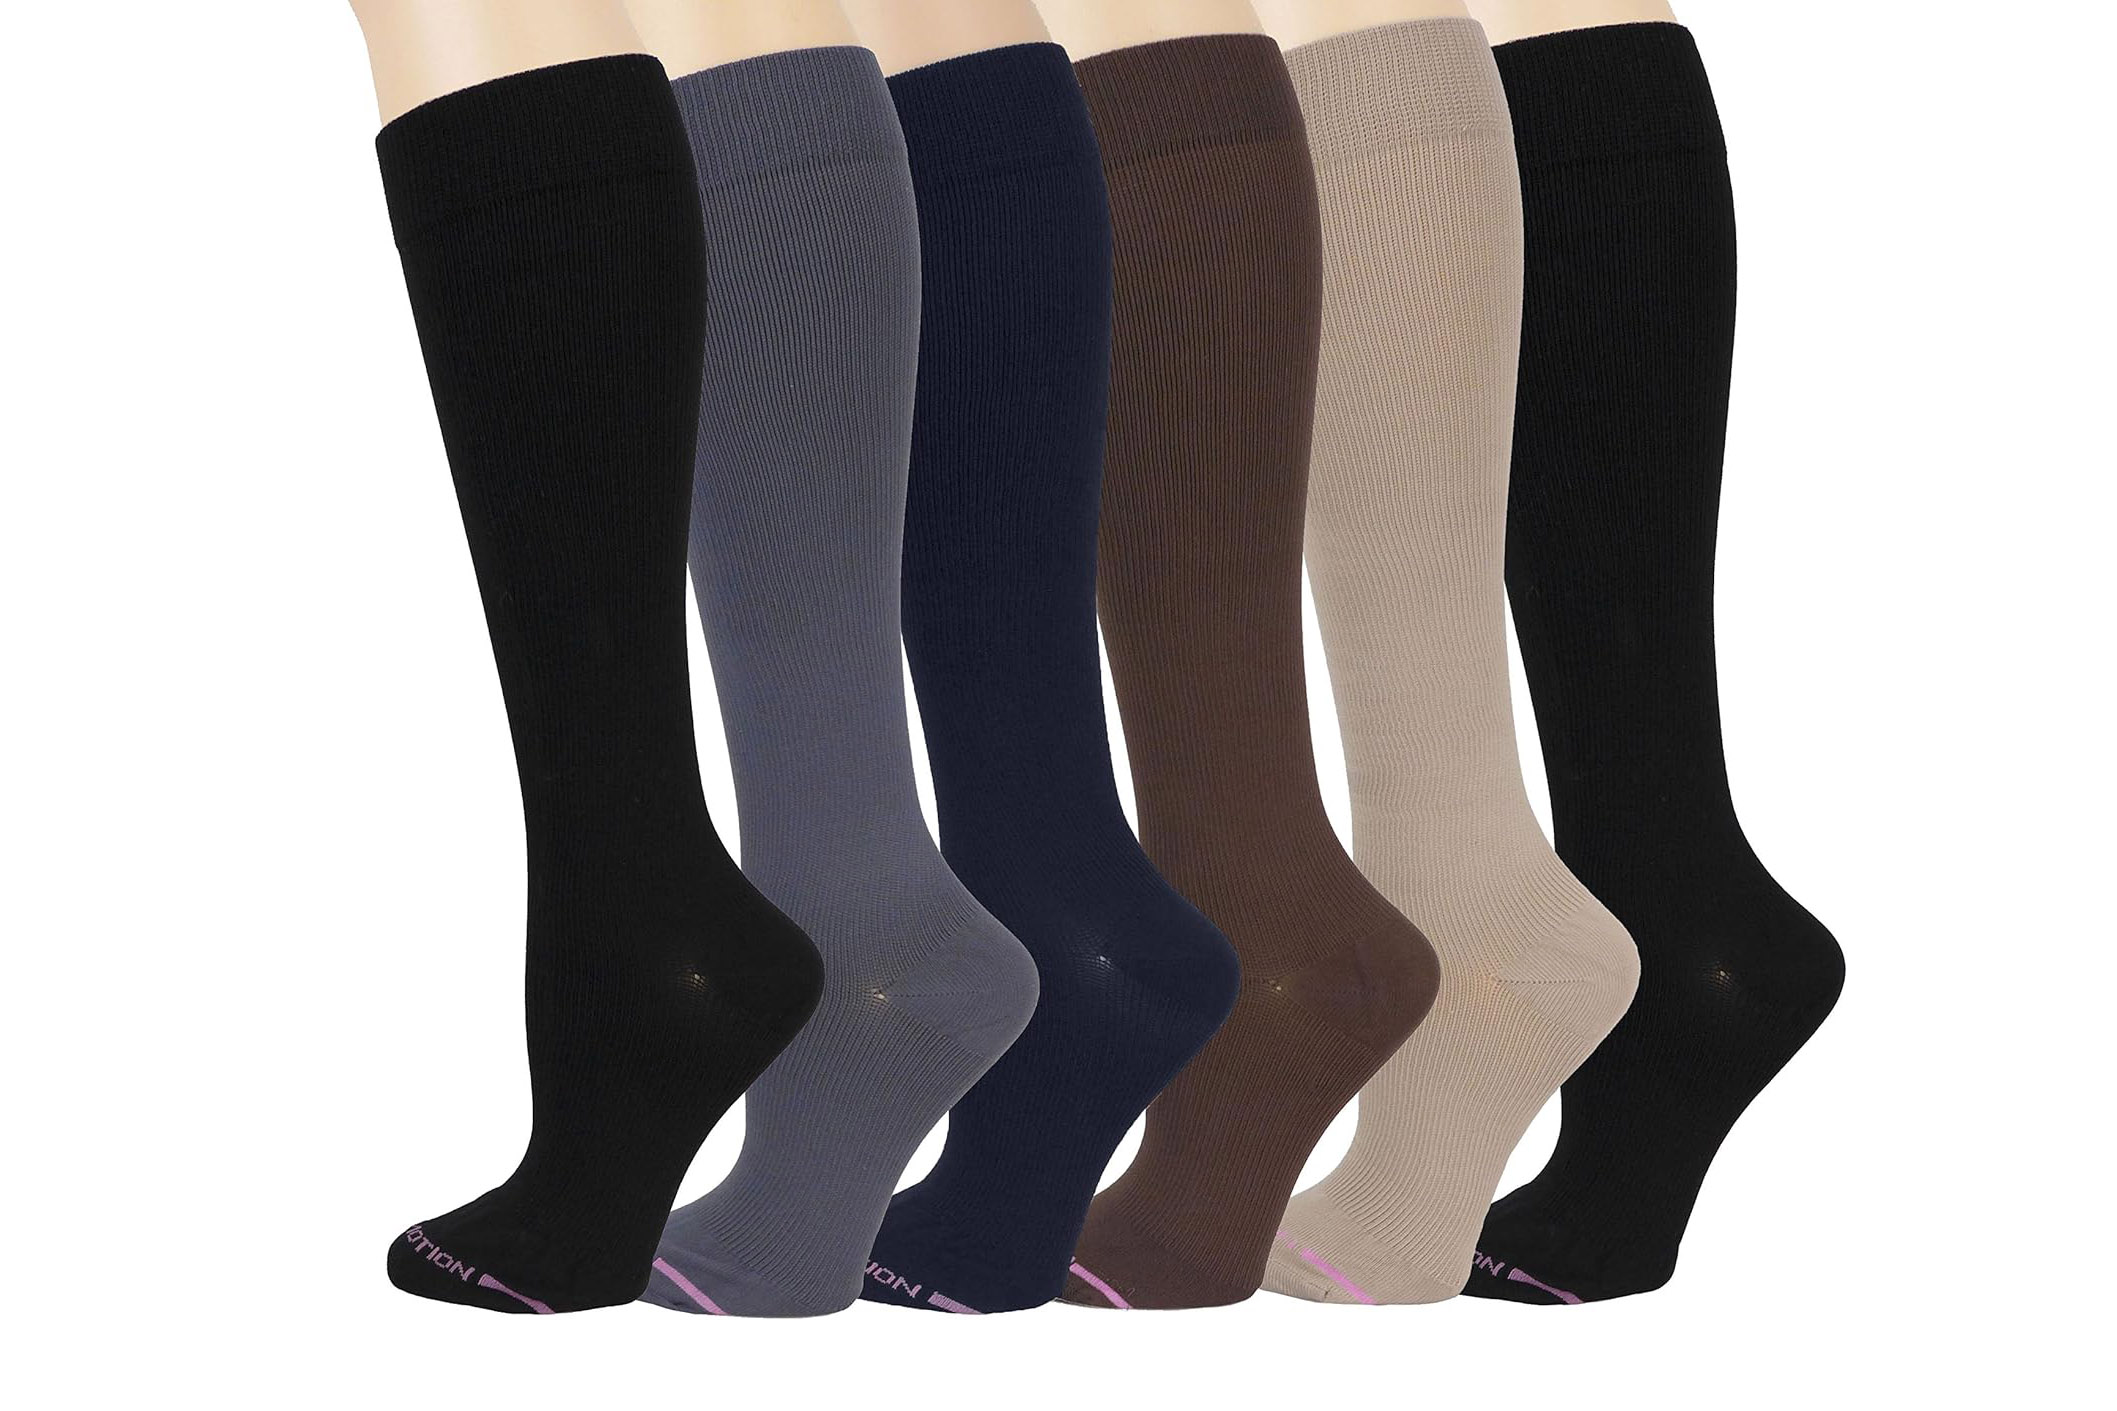 The Best Compression Socks for Women